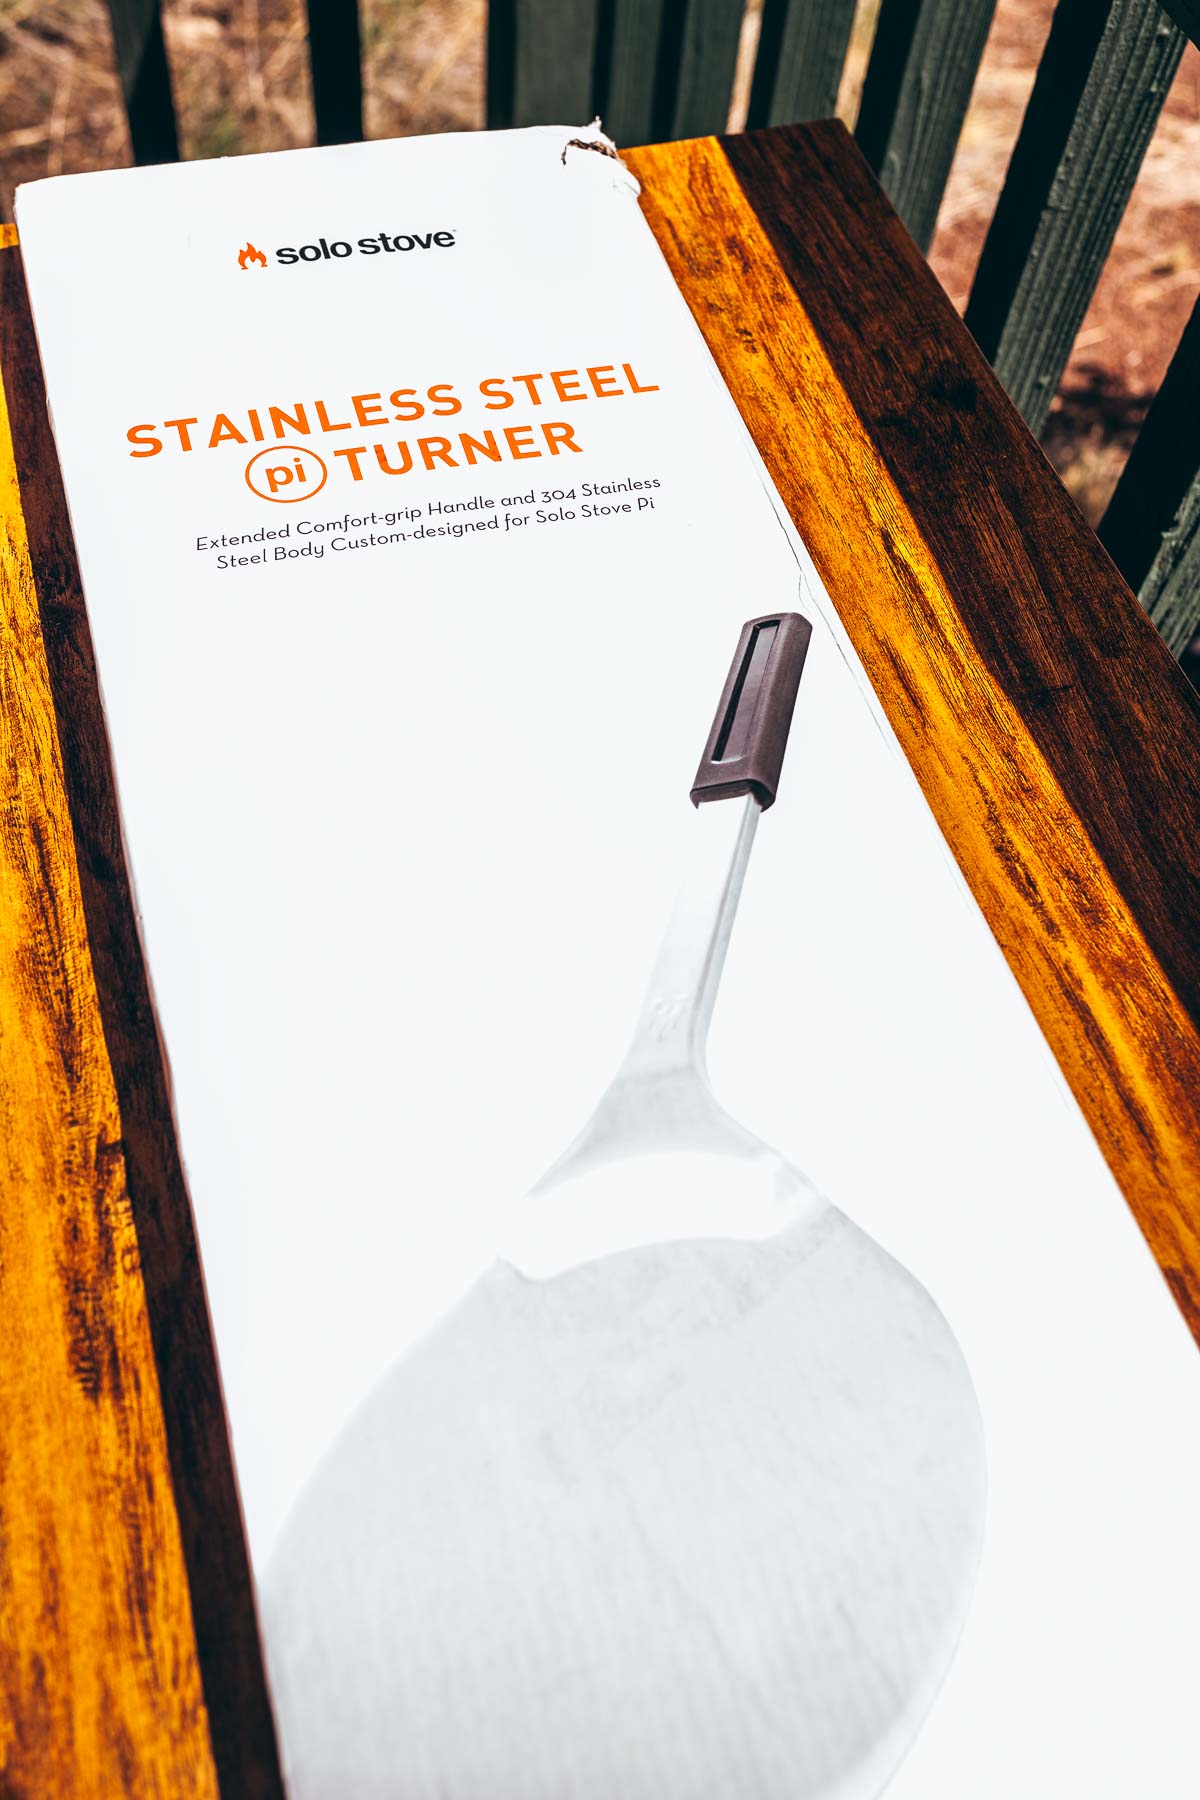 A stainless steel spatula on a wooden table in the presence of a solo stove pizza oven.